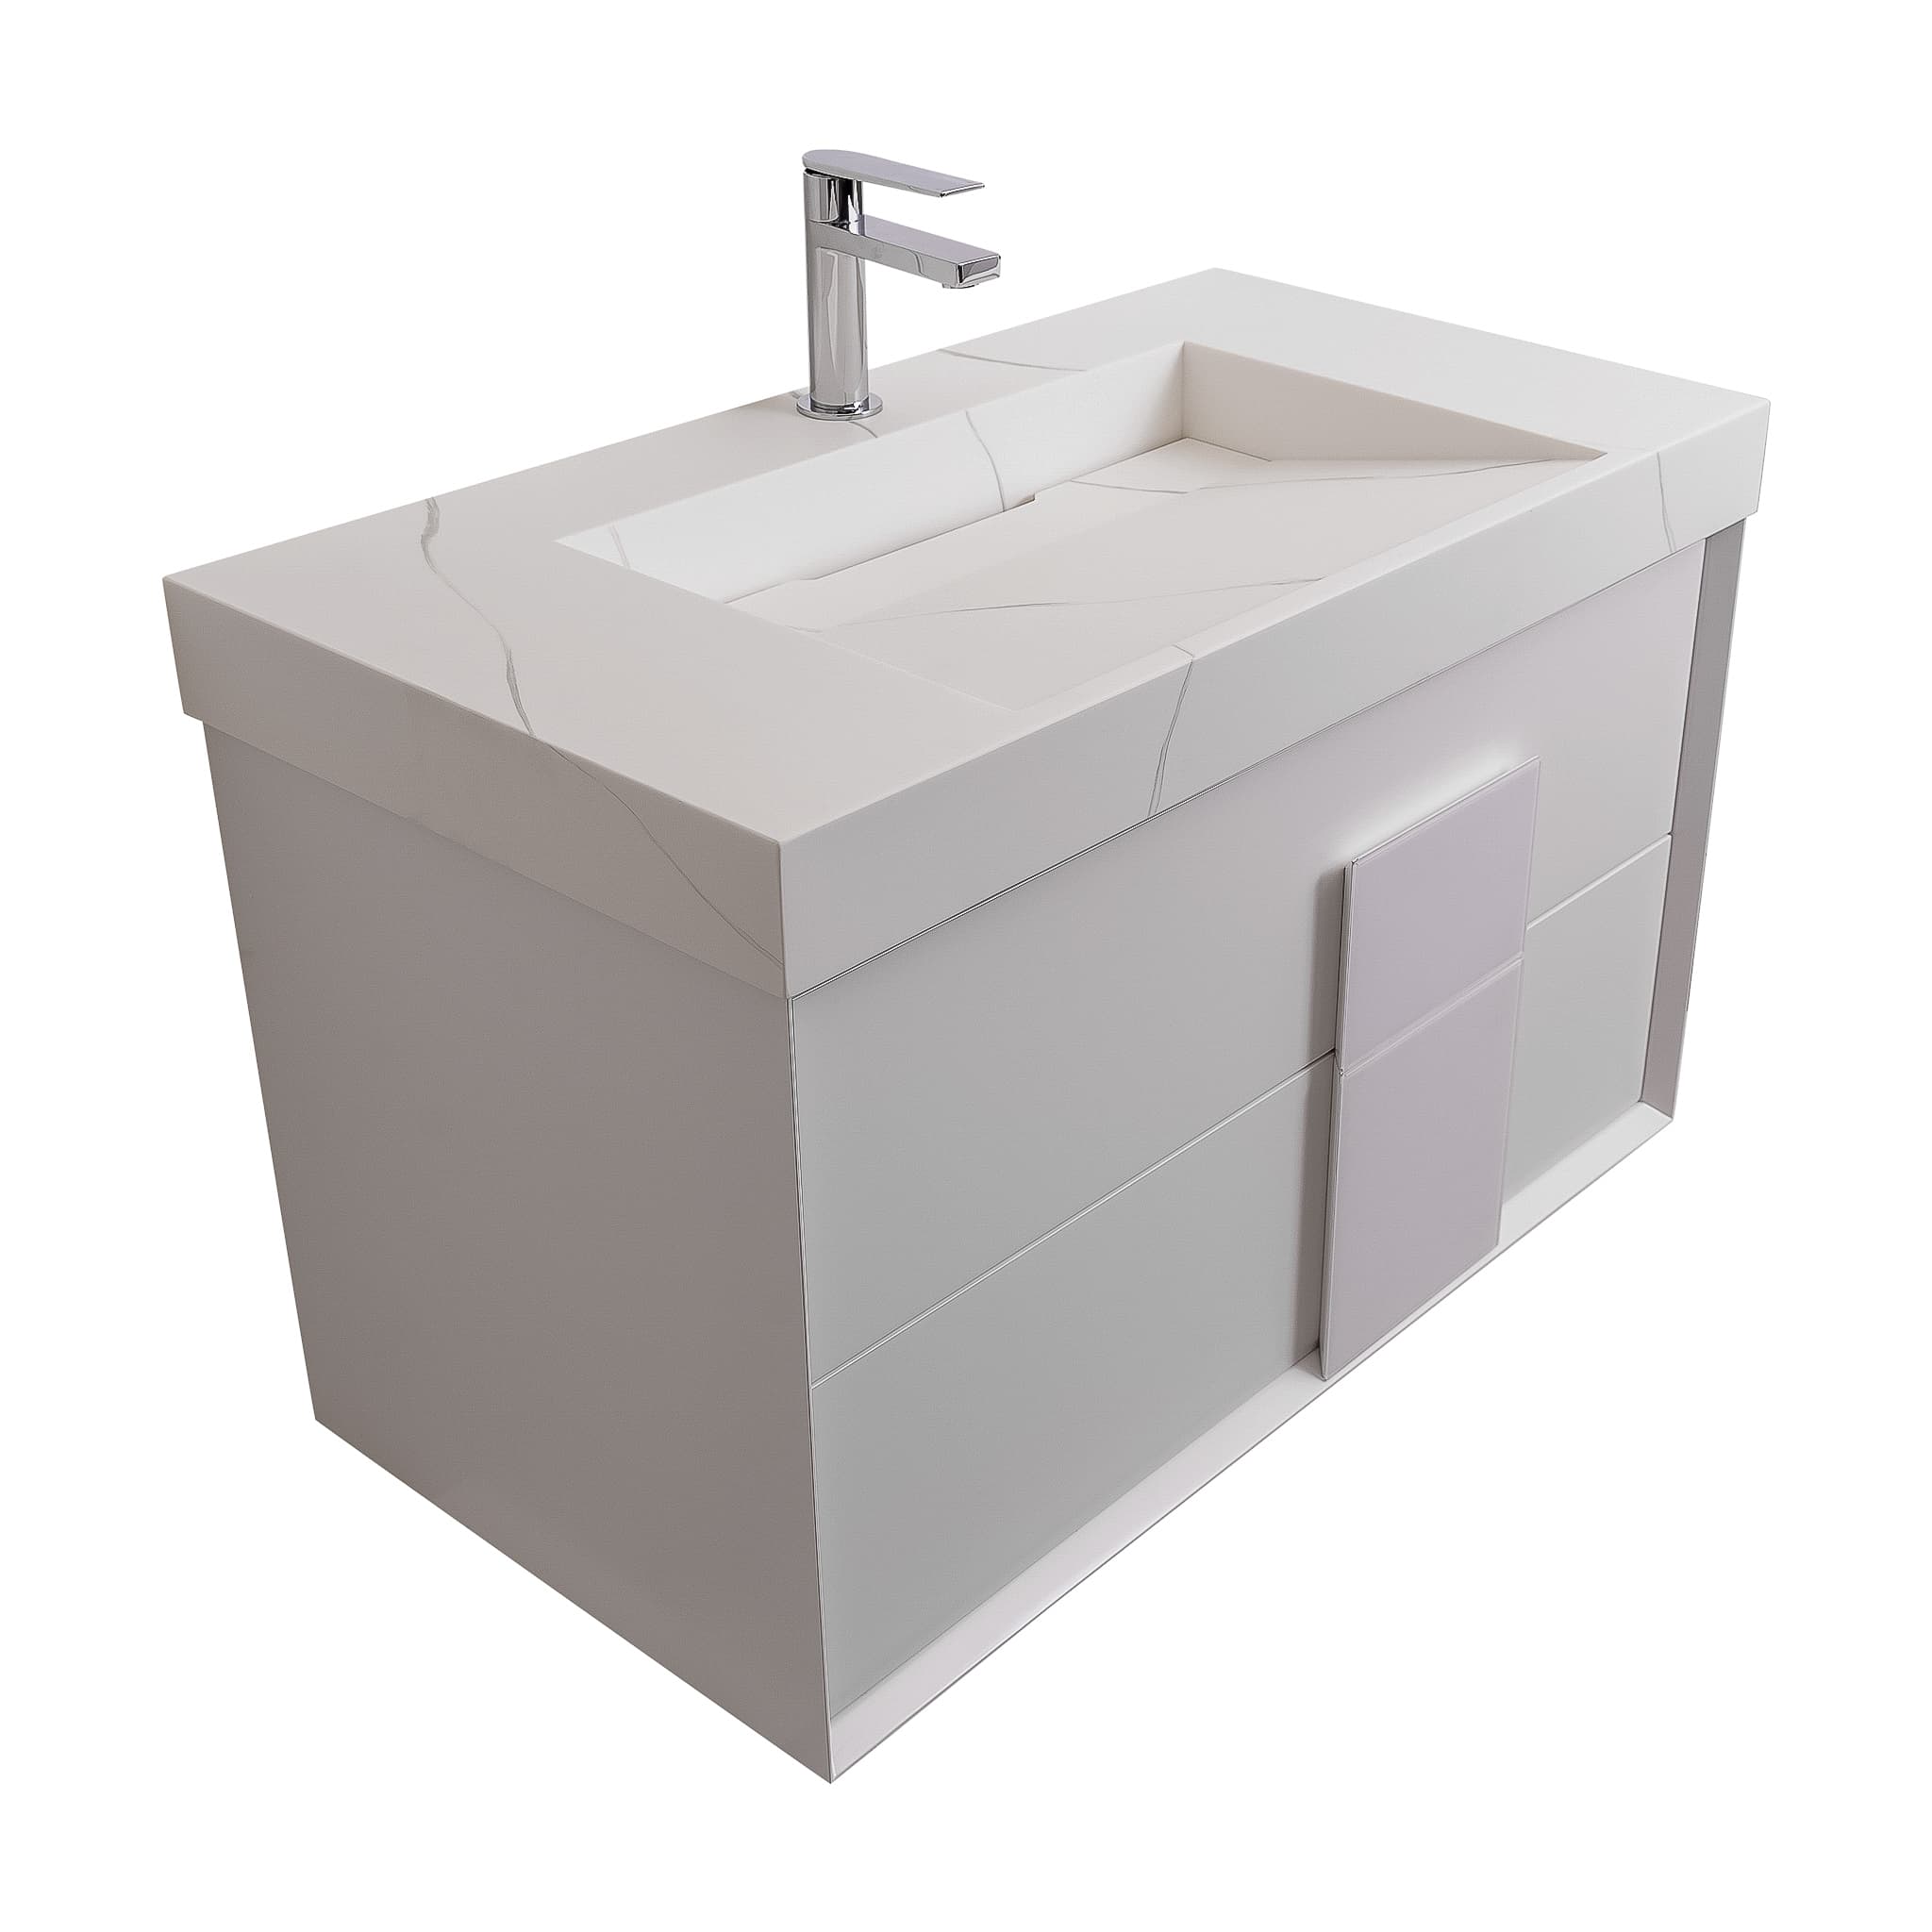 Piazza 31.5 Matte White With White Handle Cabinet, Solid Surface Matte White Carrara Infinity Sink, Wall Mounted Modern Vanity Set